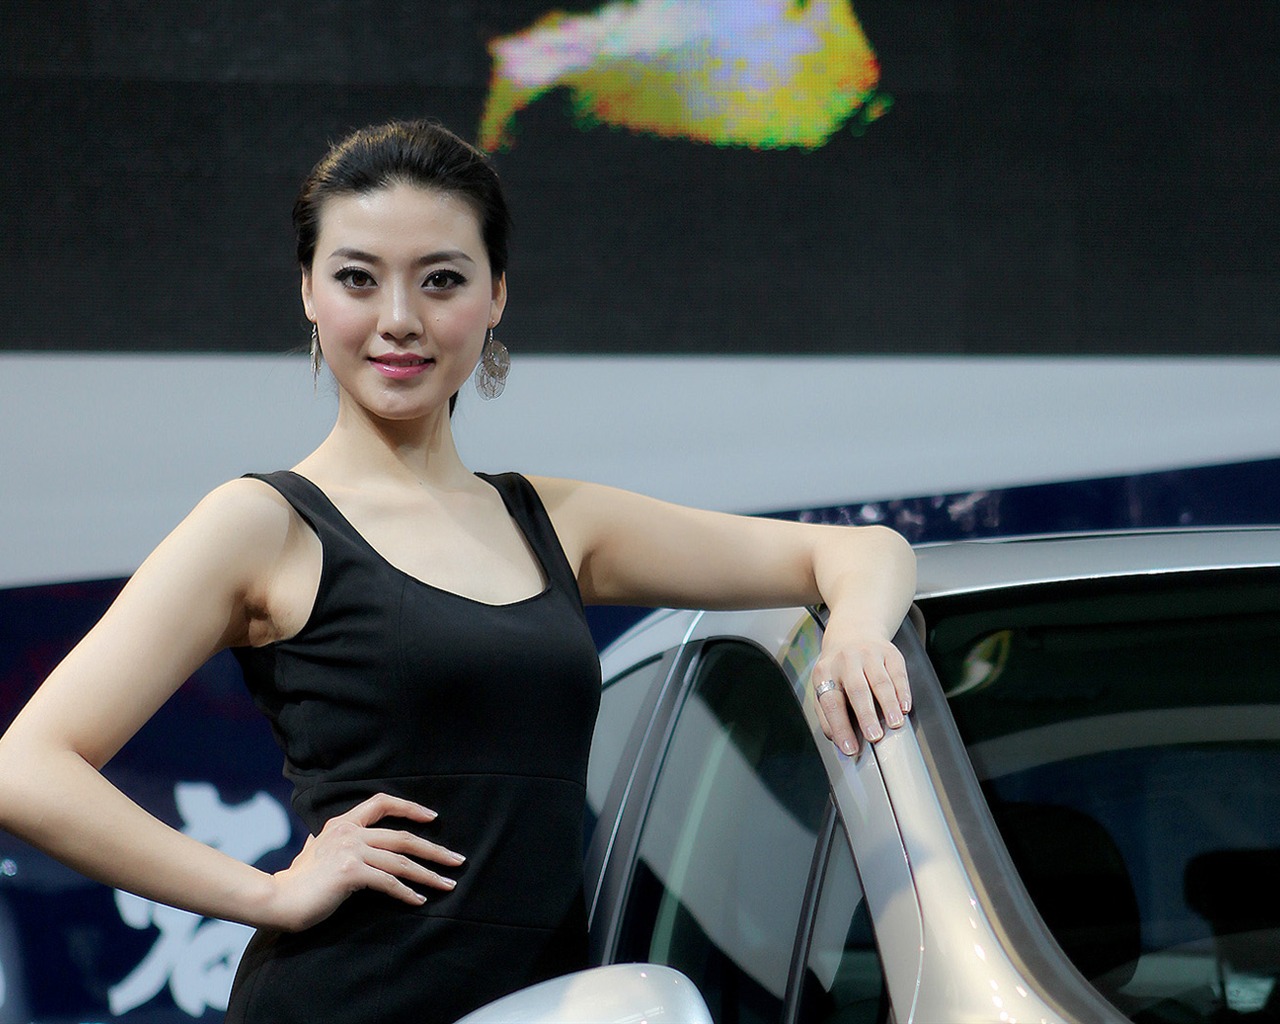 2010 Beijing Auto Show car models Collection (2) #10 - 1280x1024